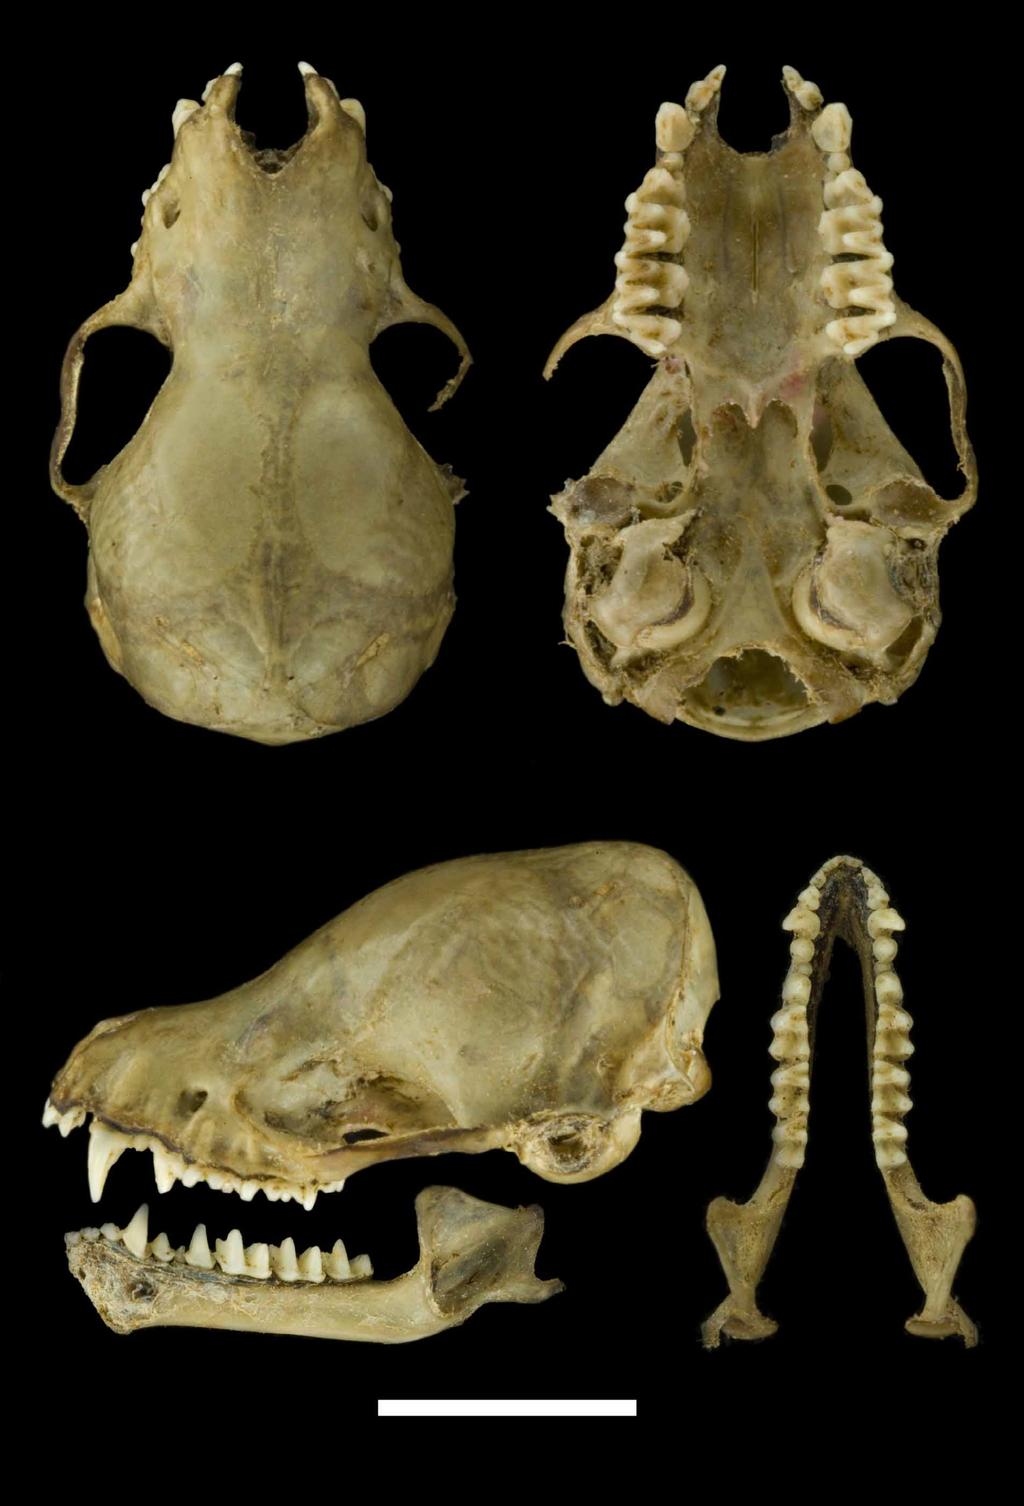 FIGURE 3. Dorsal, lateral and ventral views of the skull and mandible of the holotype of M. guaycuru (ALP 9277). Scale bar = 5 mm.